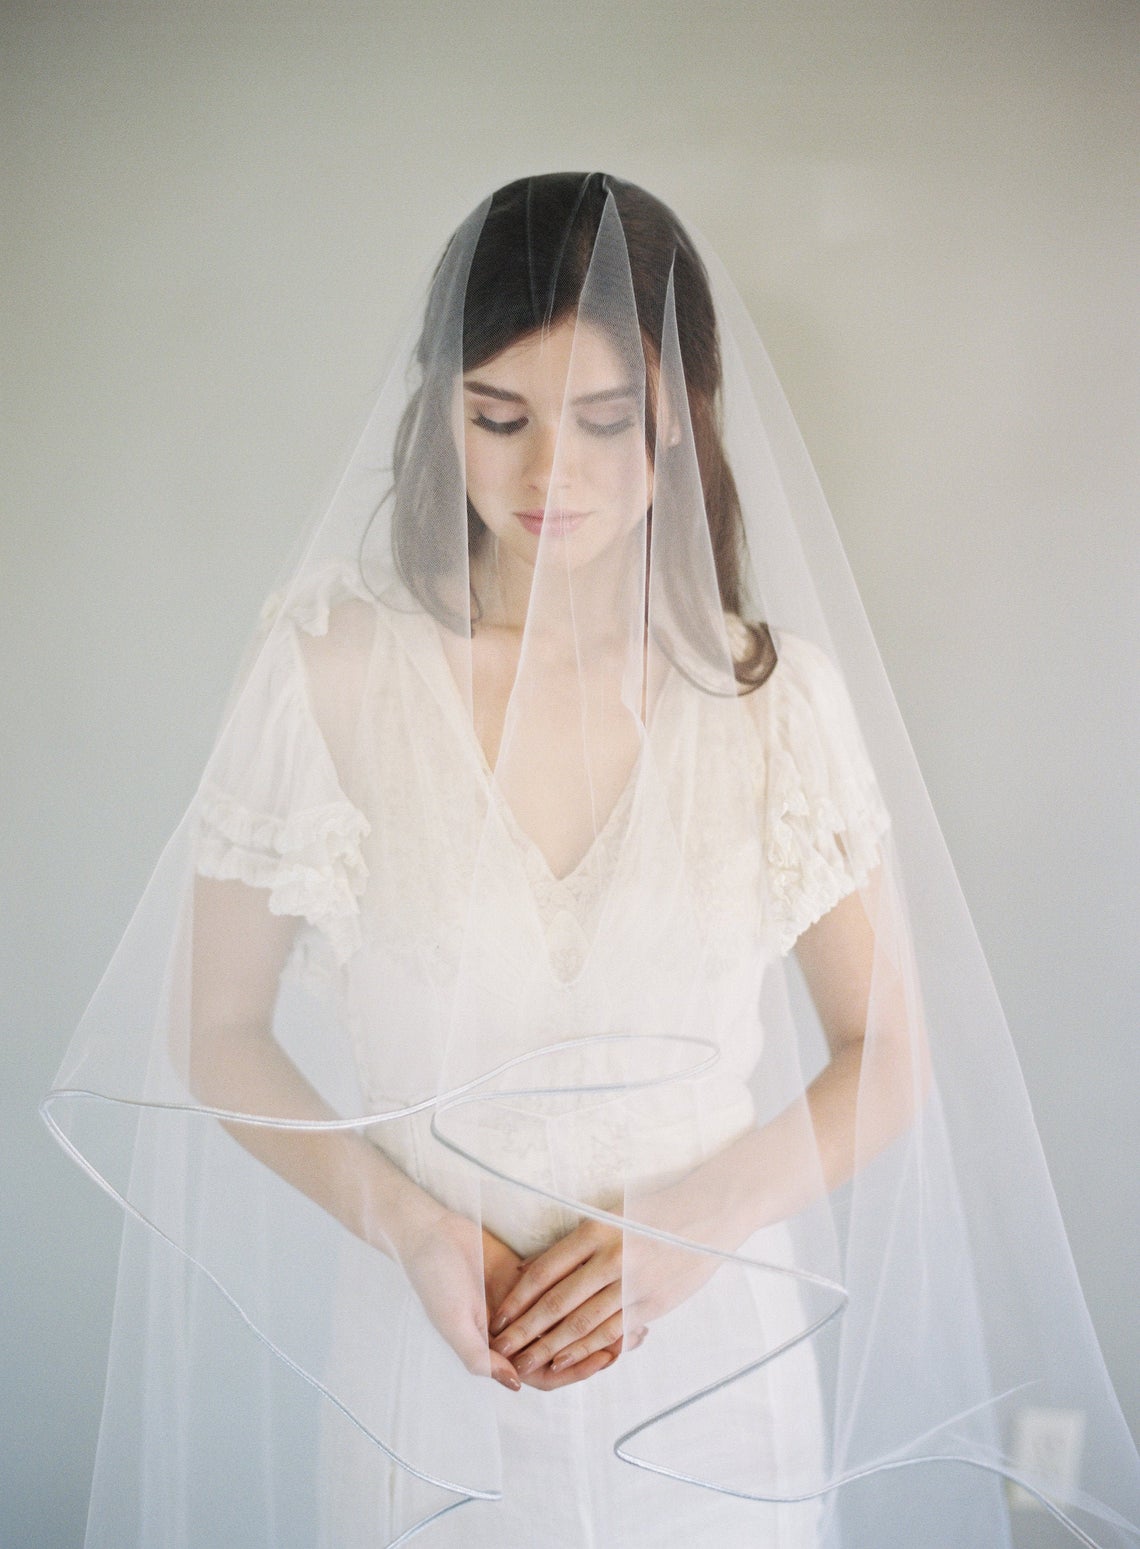 Chloe Veil_Two-Tier Waltz Length Bridal Veil with Chantilly French Lace Appliqués